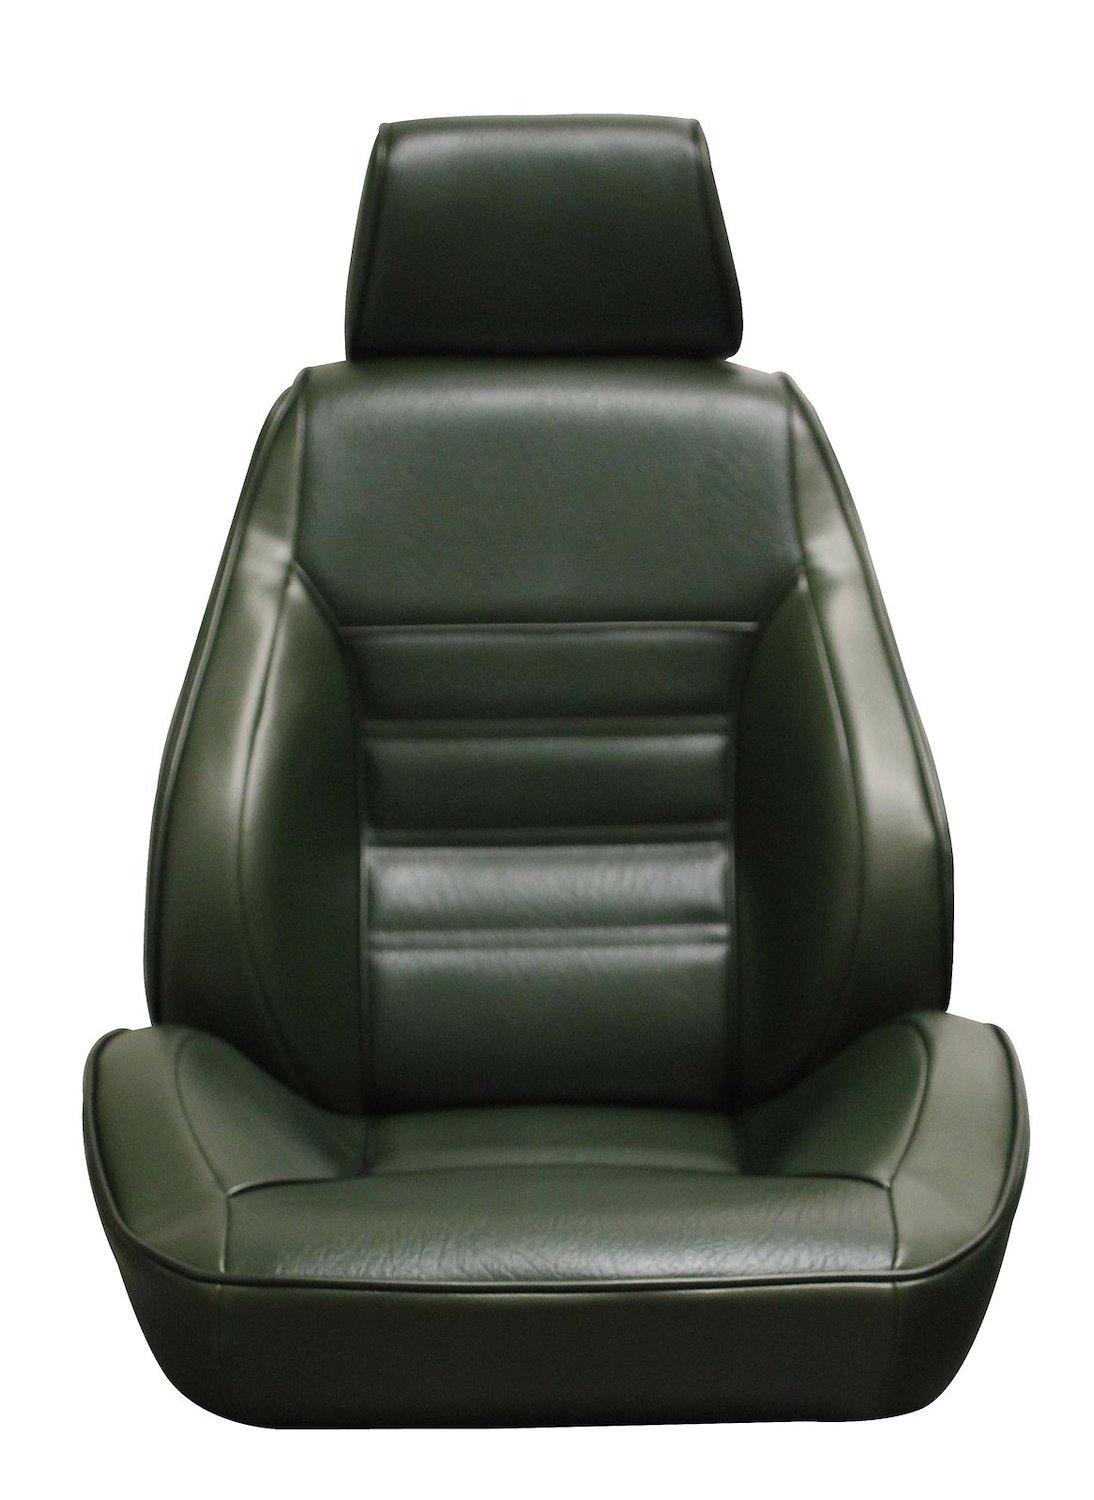 1971-1973 Ford Mustang Standard Interior Green Touring II Preassembled Reclining Front Bucket Seats